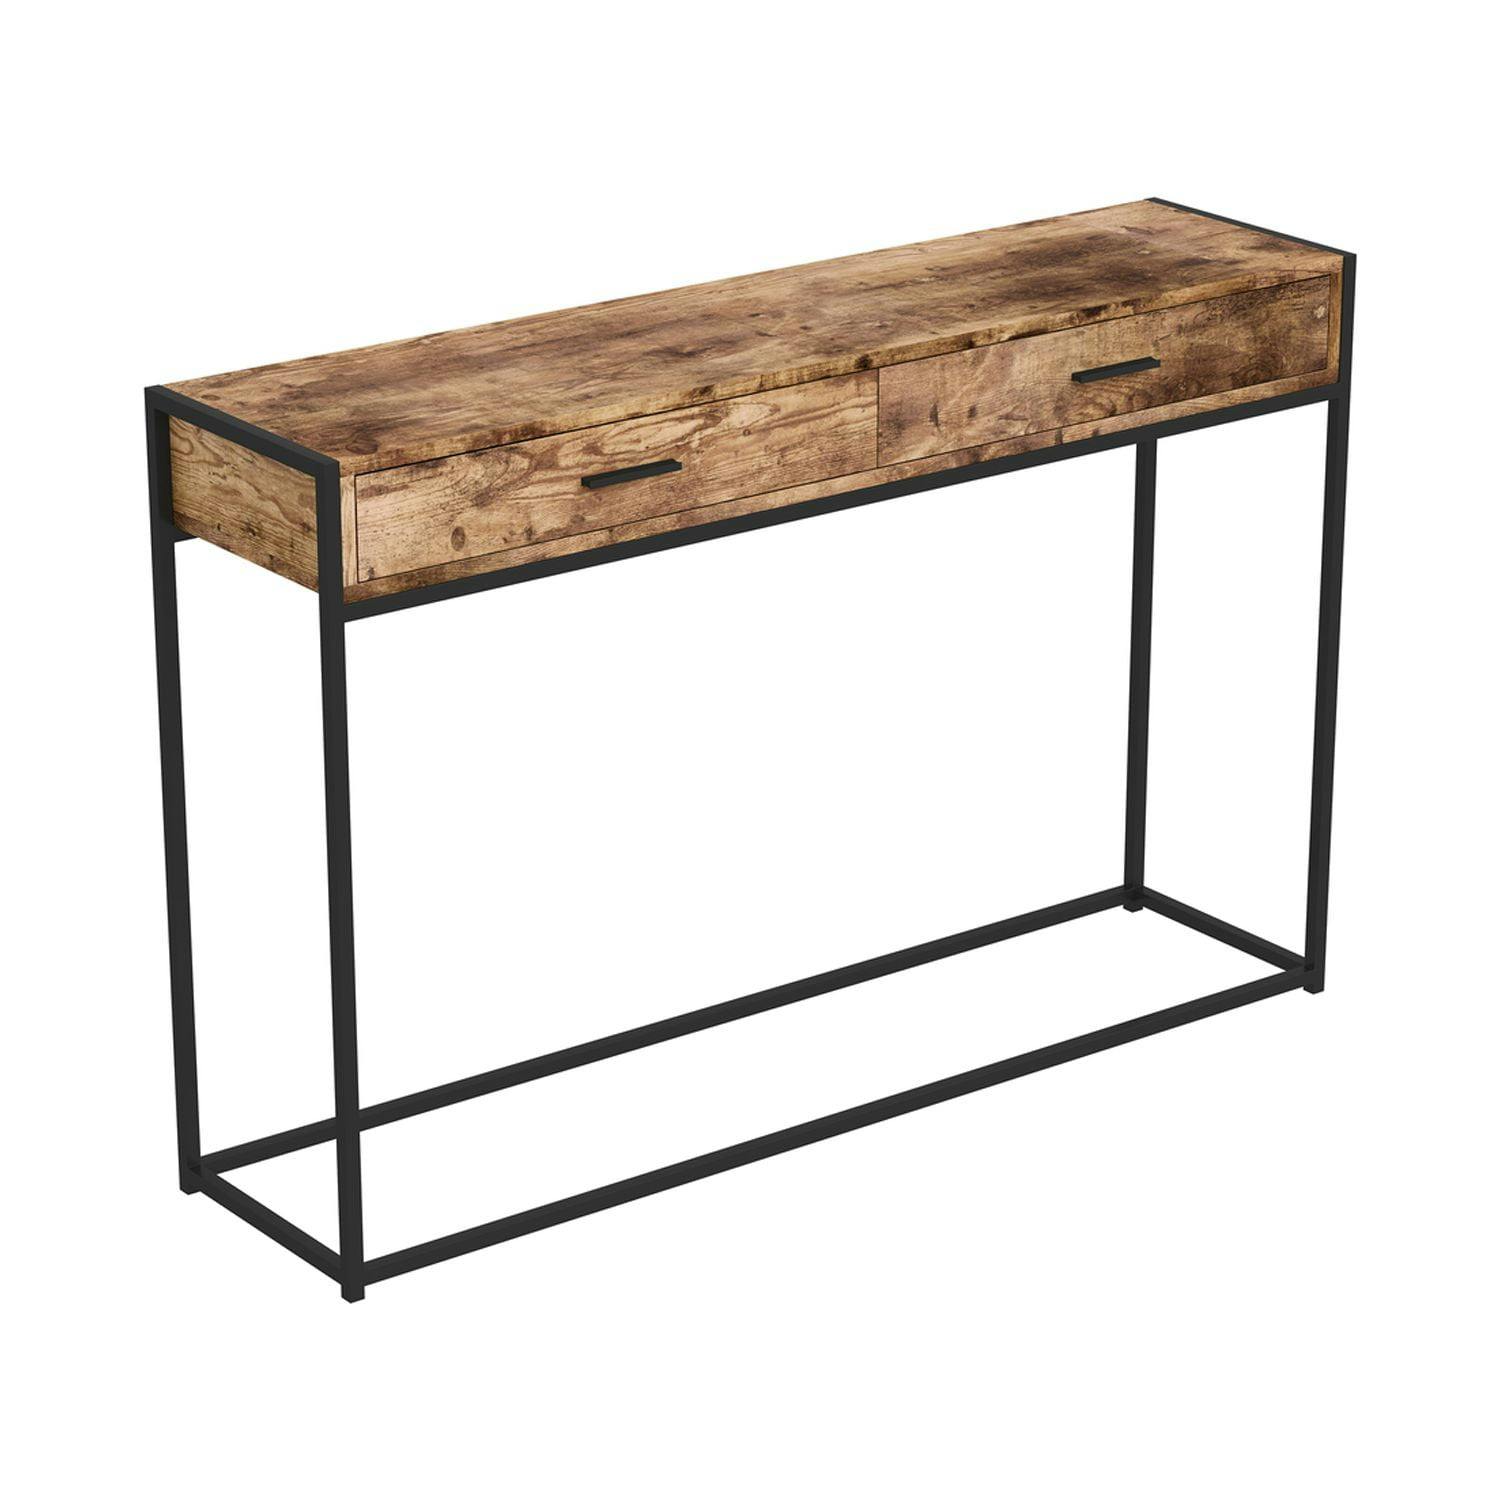 Rustic Chic 48" Reclaimed Wood Console with Black Metal Frame and Storage Drawers